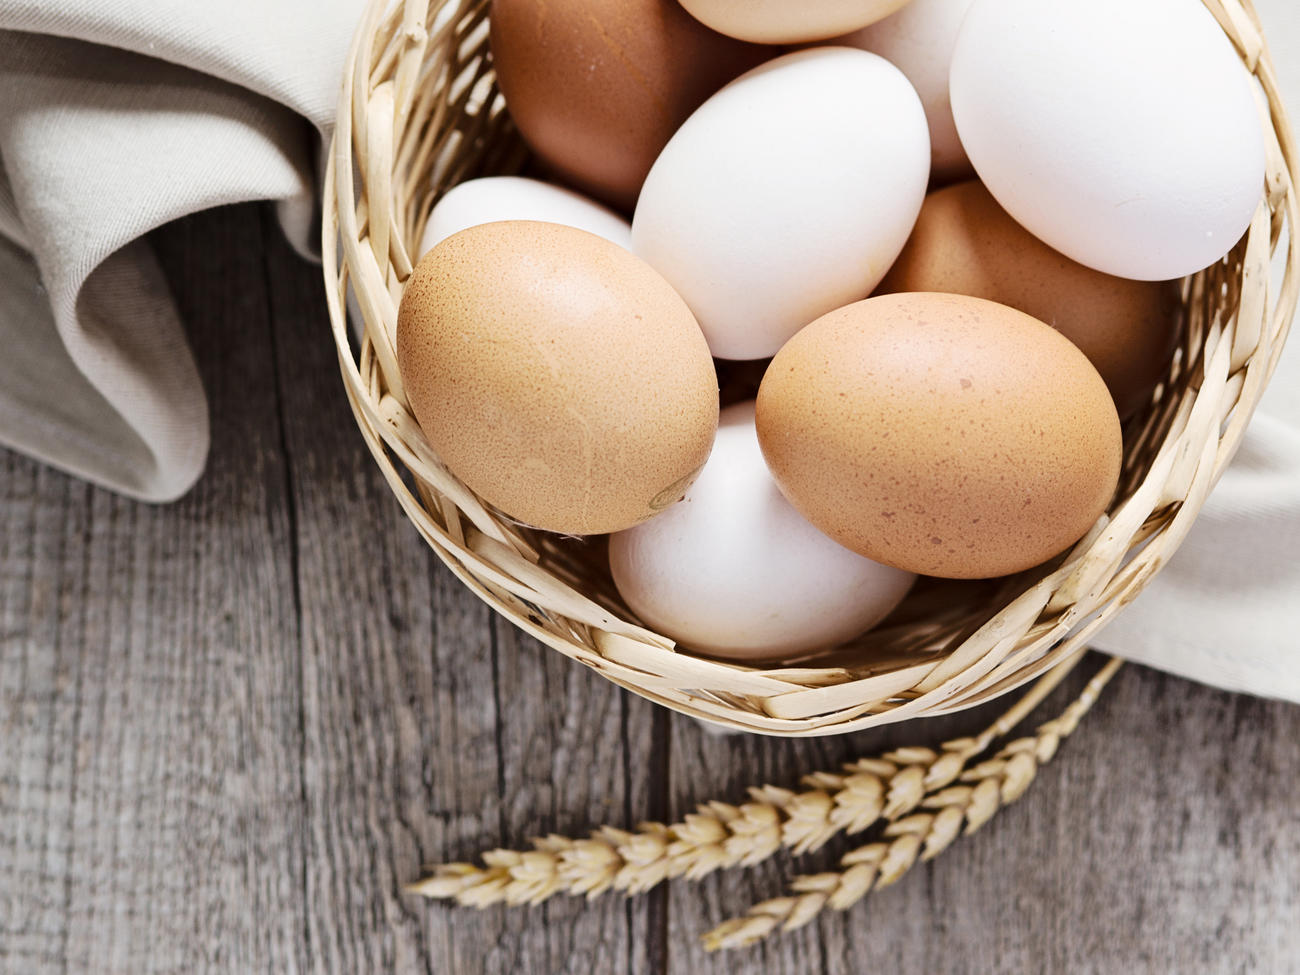 What’s the Difference Between Brown and White Eggs?